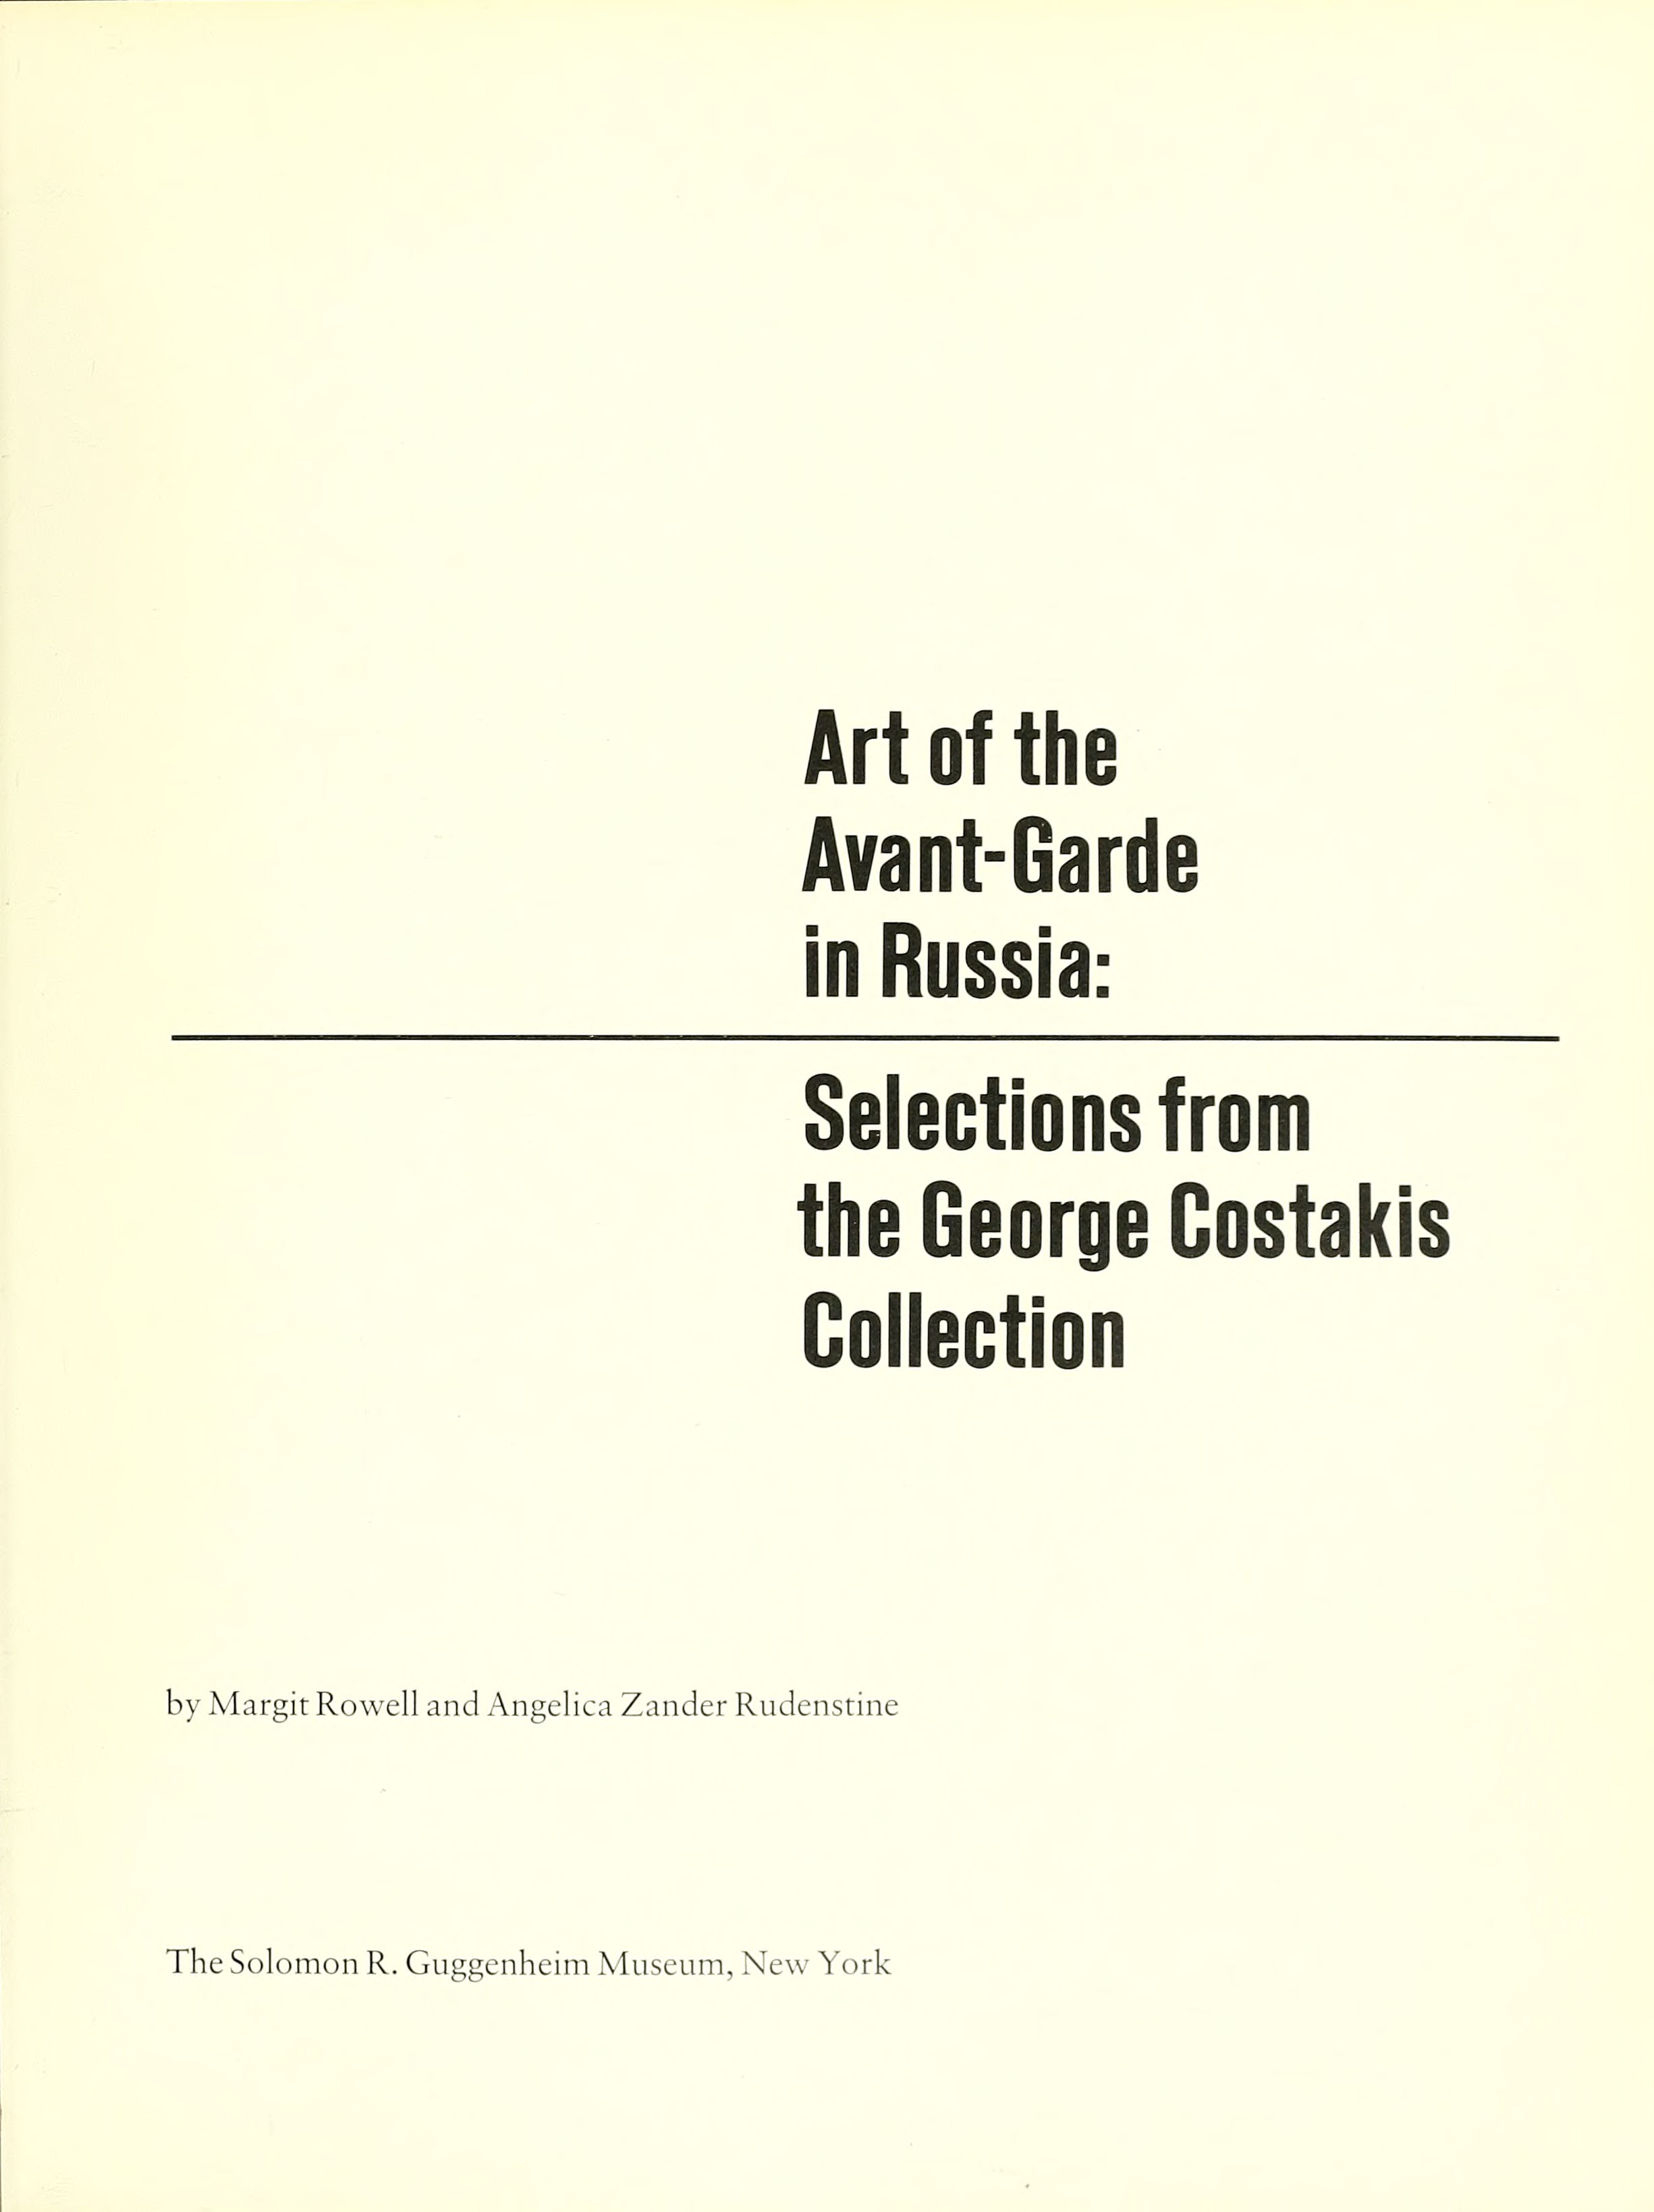 Art of the Avant-Garde in Russia : Selections from the George Costakis Collection / by Margit Rowell and Angelica Zander Rudenstine. — New York : The Solomon R. Guggenheim Museum, 1981